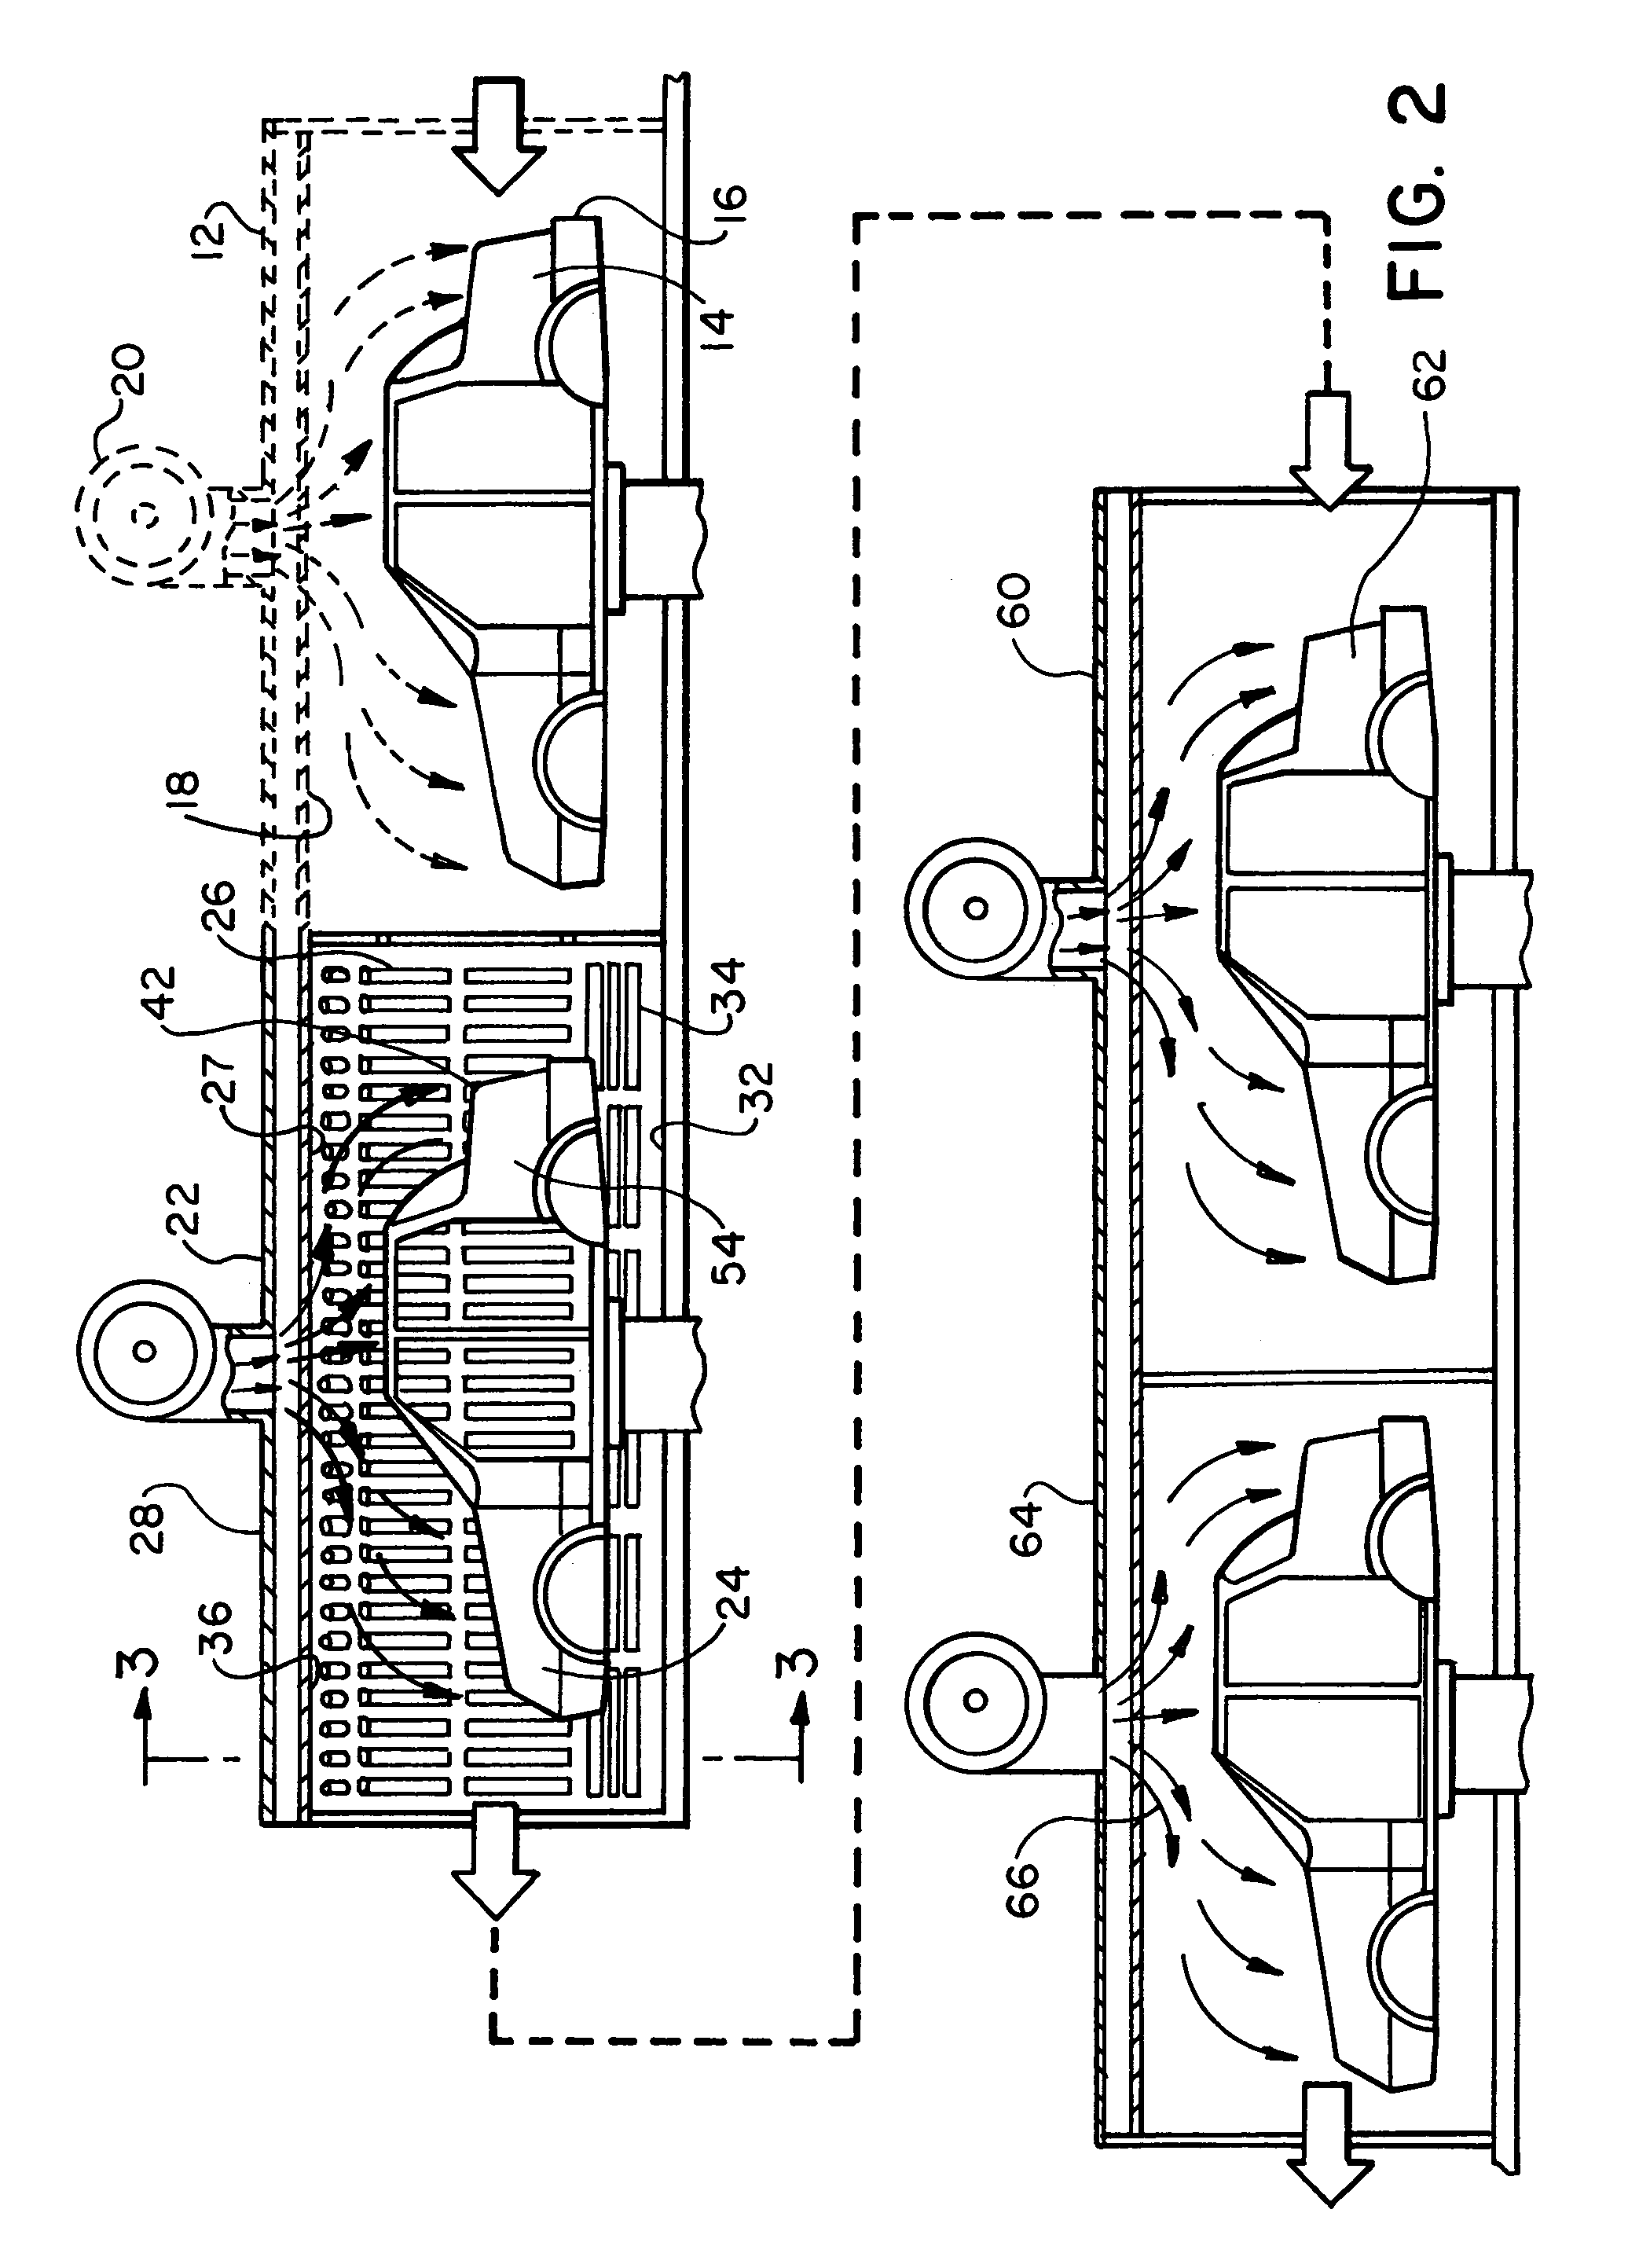 Multi-stage processes for coating substrates with multi-component composite coating compositions